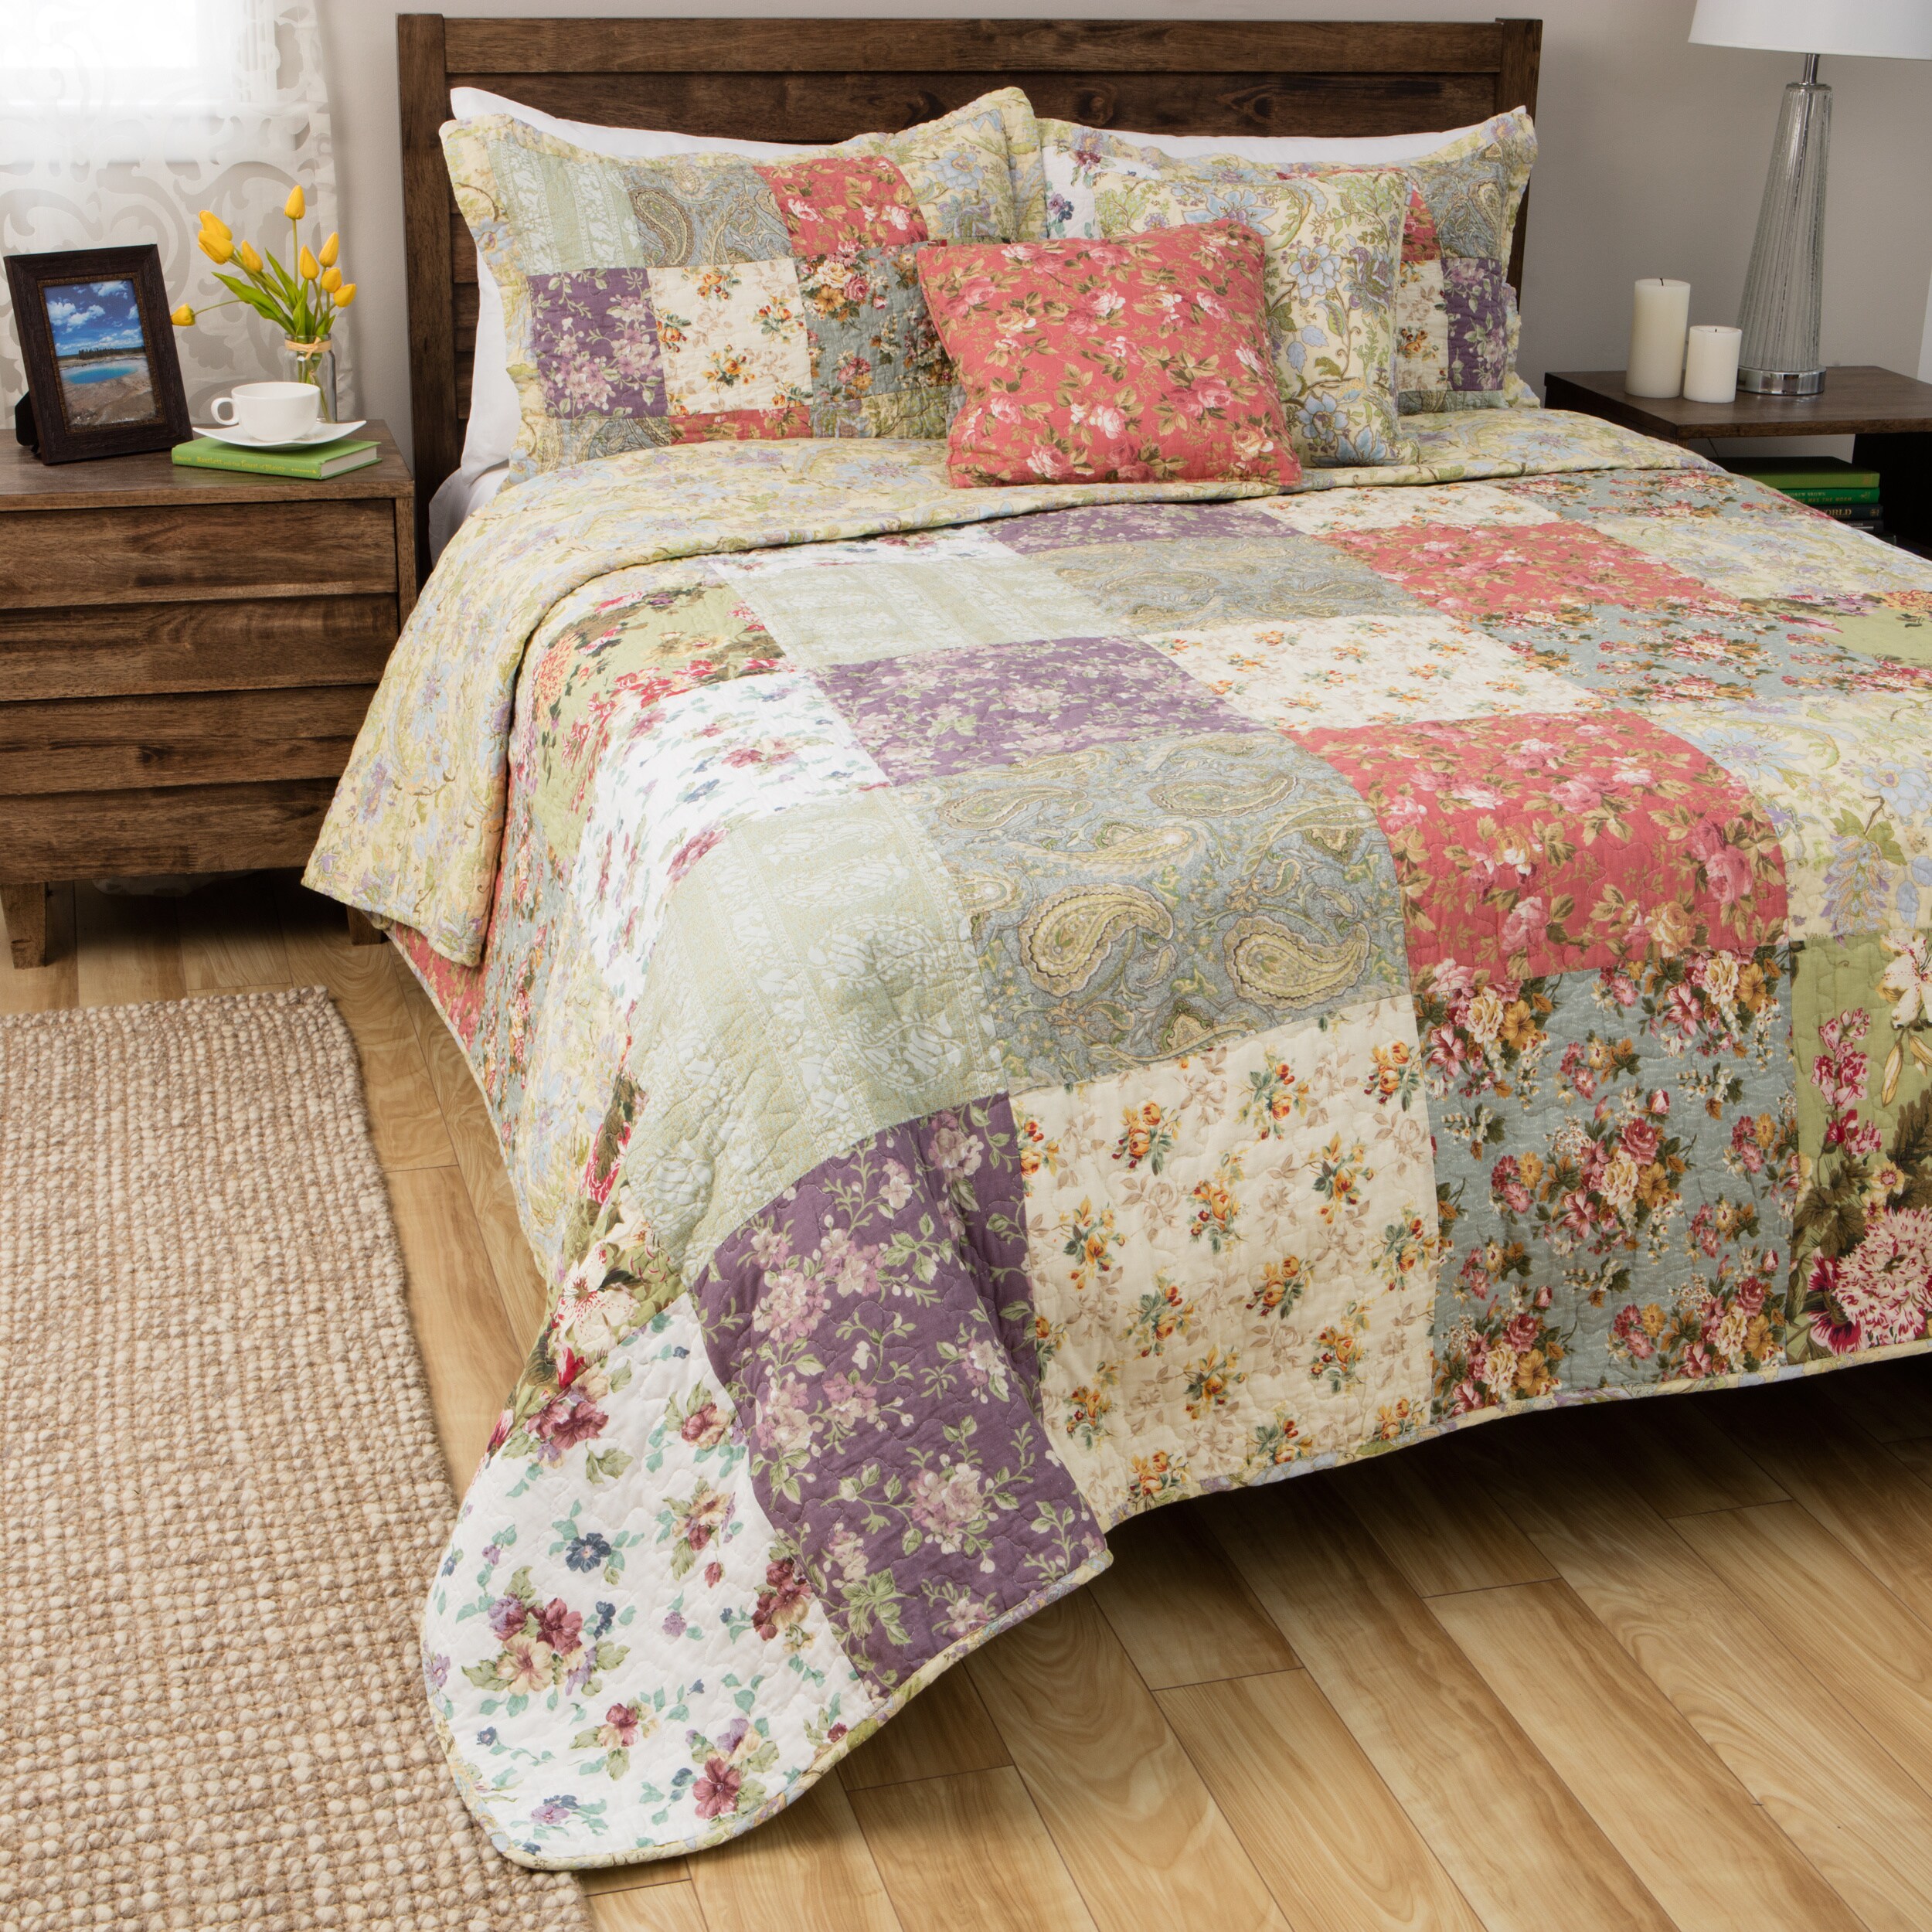 Details about   Greenland Home Blooming Prairie Cotton Patchwork Quilt Set 5-Piece Full/Queen, 